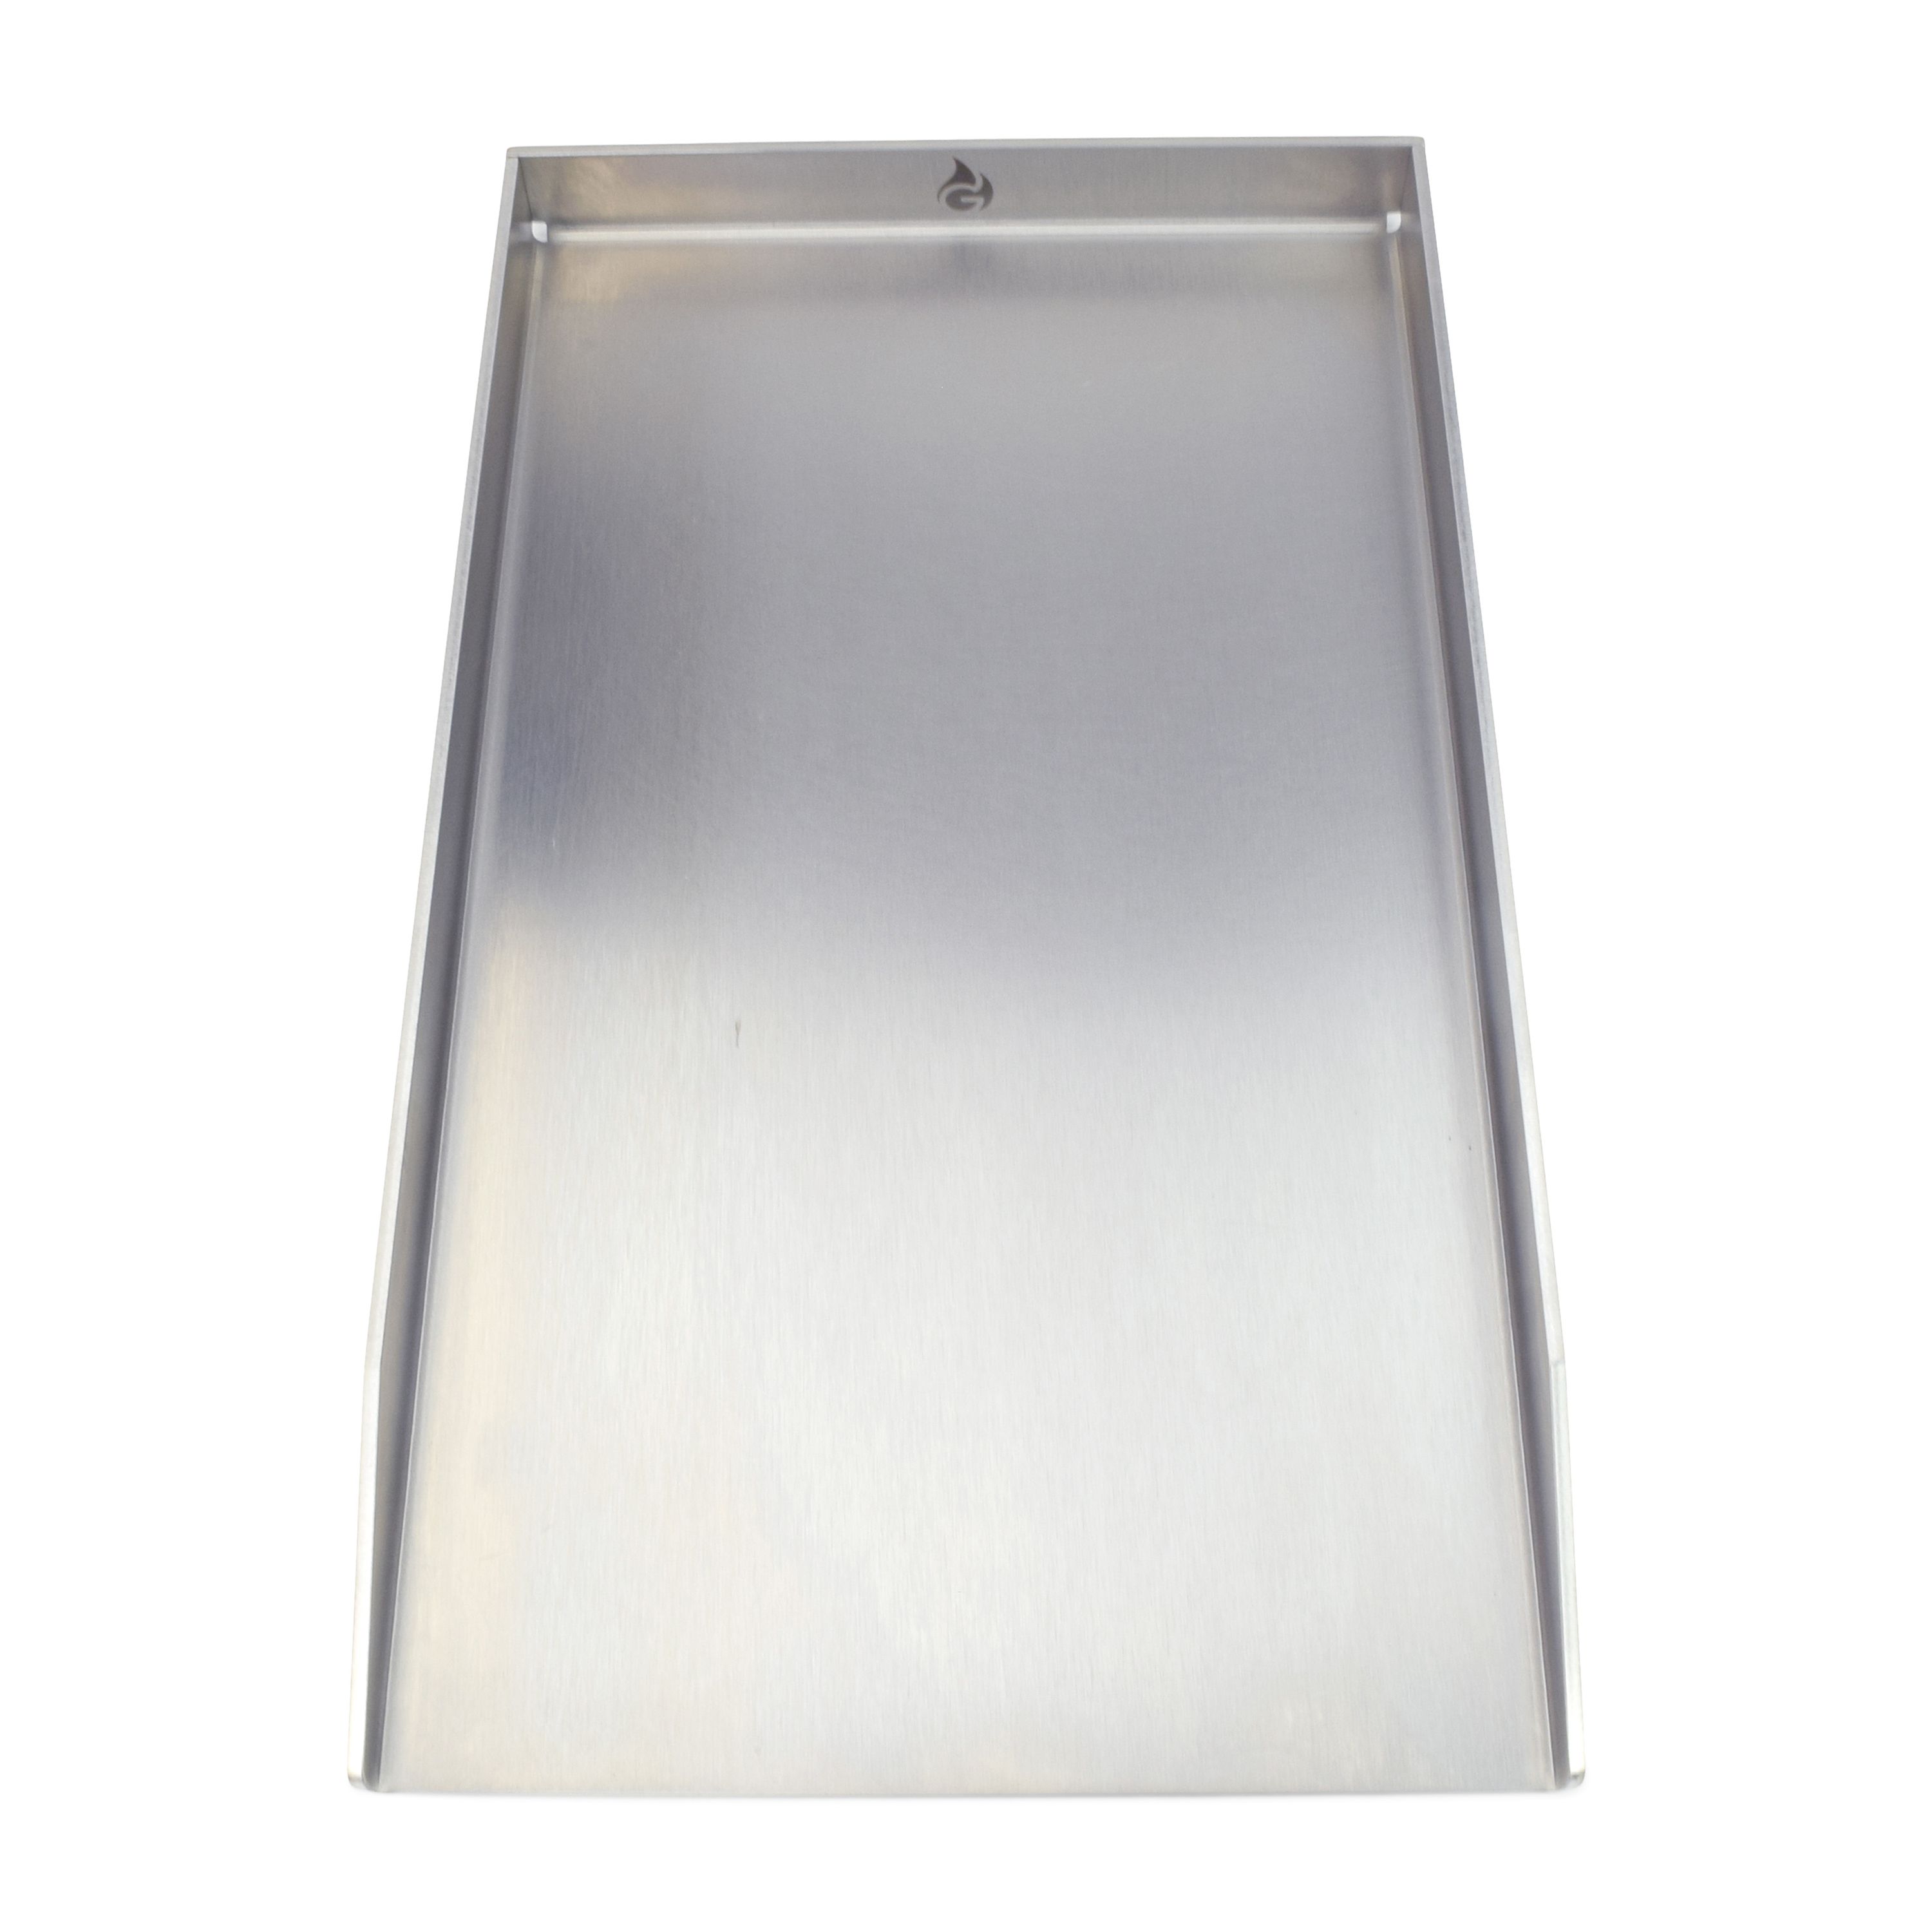 Stainless steel grill plate - Plancha 44,3x 26 for Weber Spirit 200 and 300 series (from 2013)